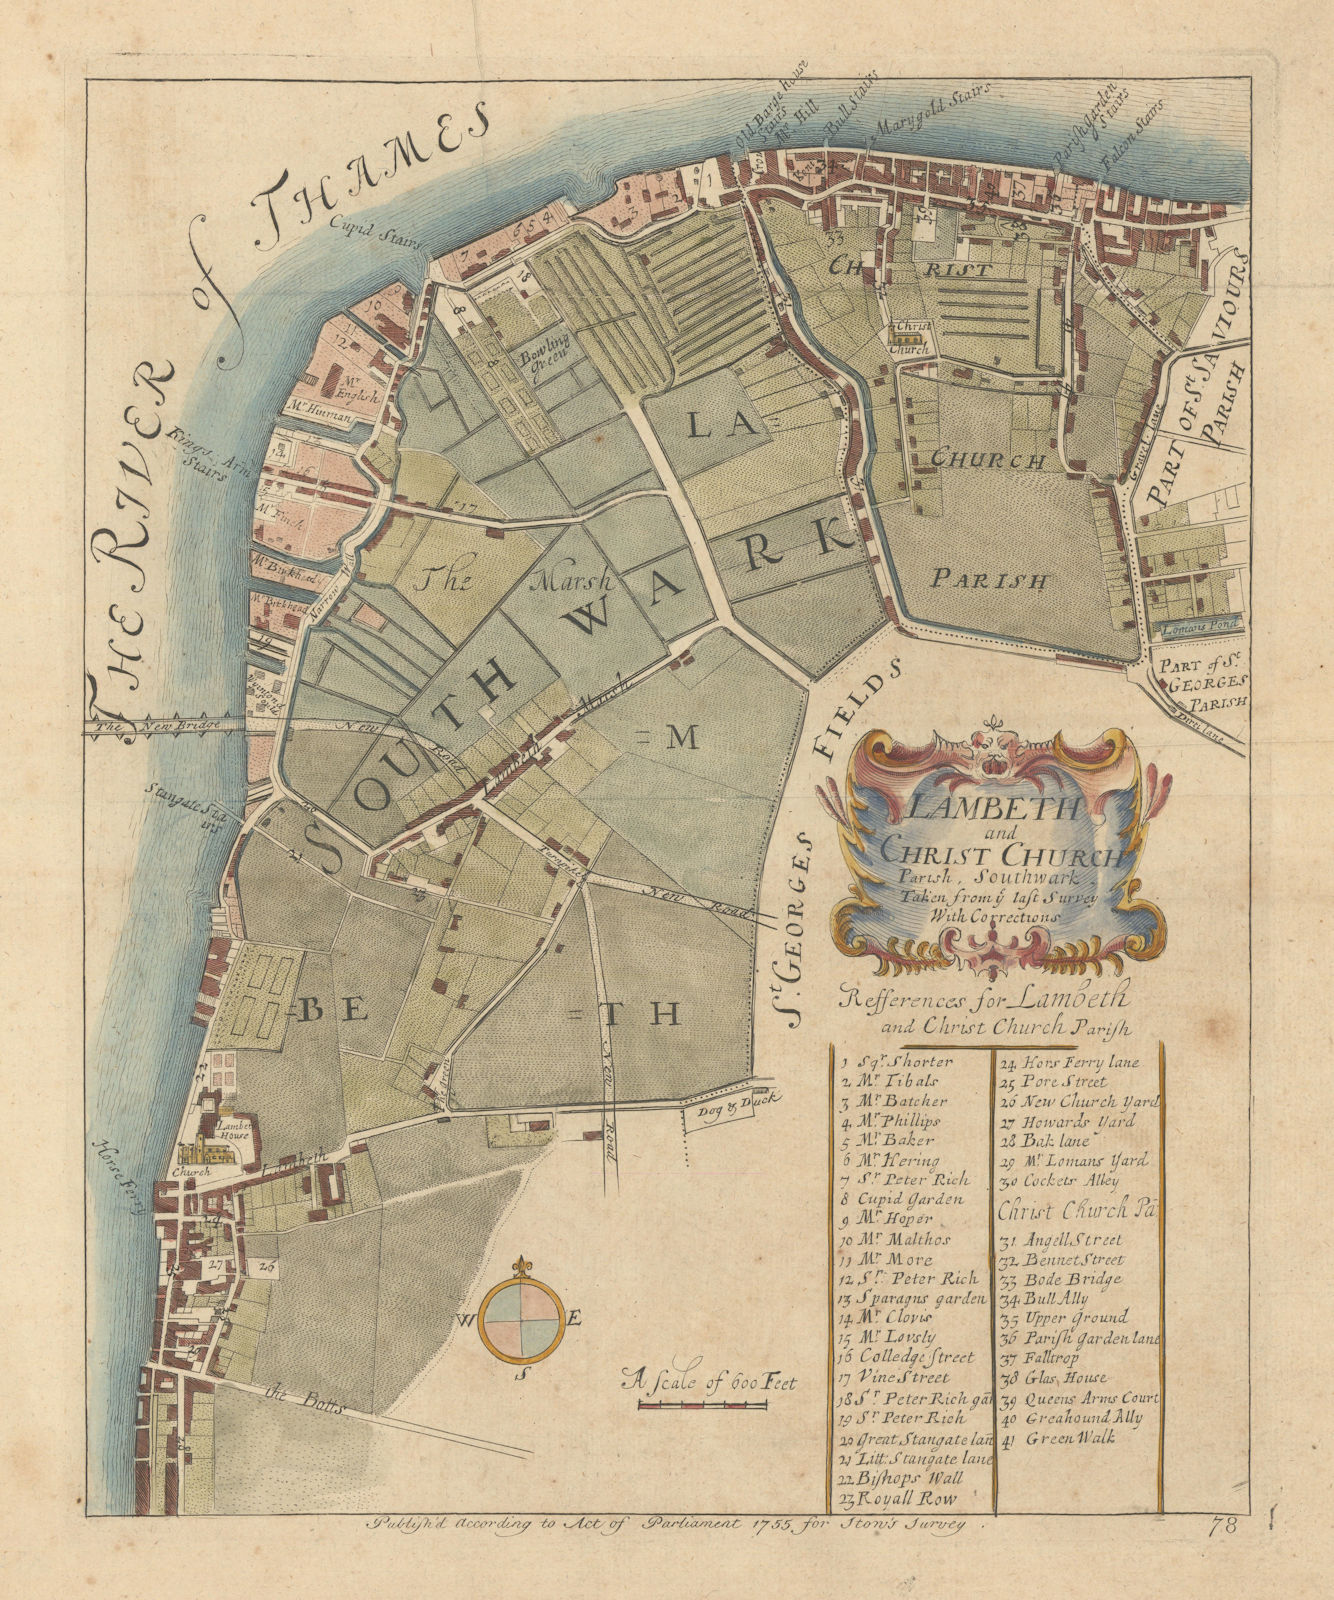 'Lambeth and Christ Church parish, Southwark'. Bankside. STOW/STRYPE 1755 map